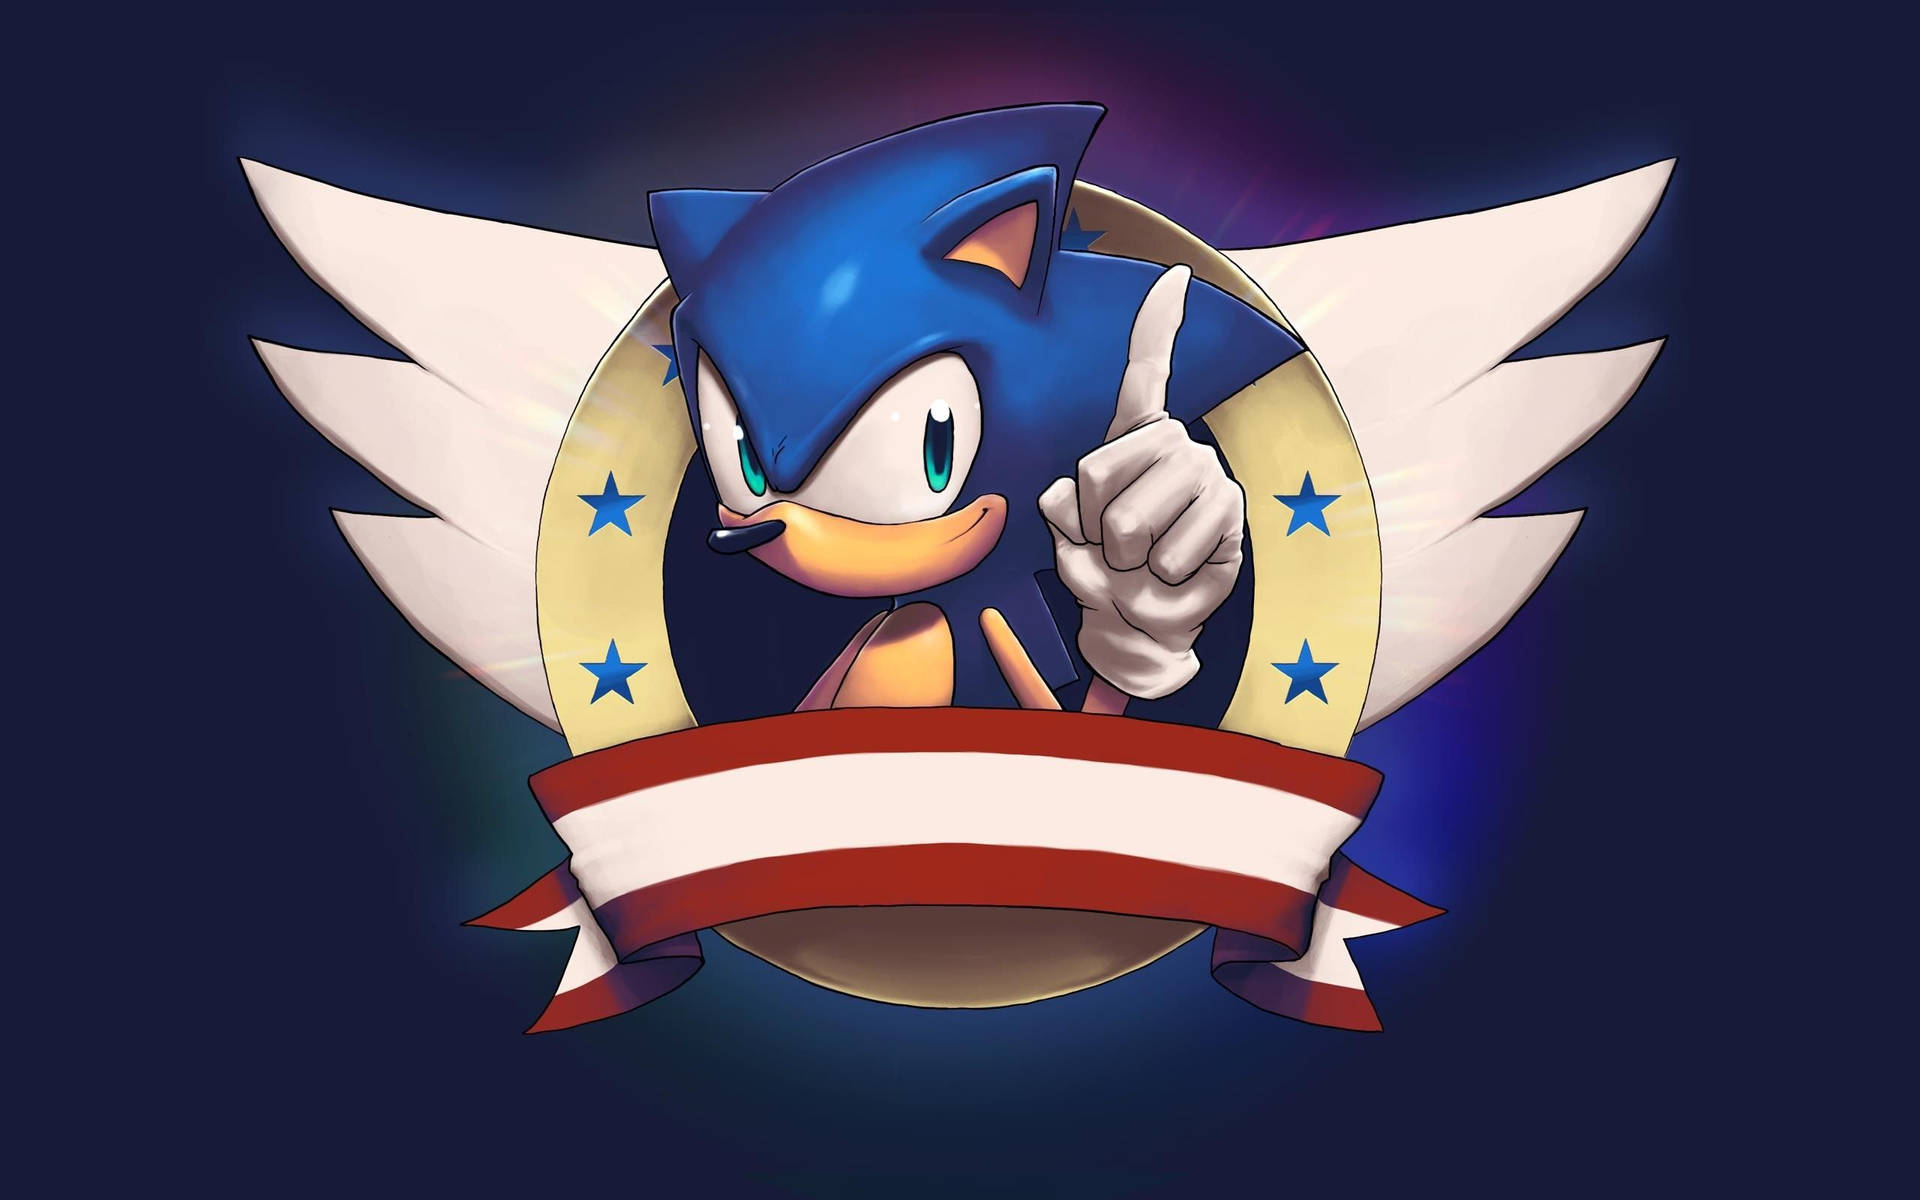 'Speed with style - Sonic, the fastest hedgehog around. Wallpaper